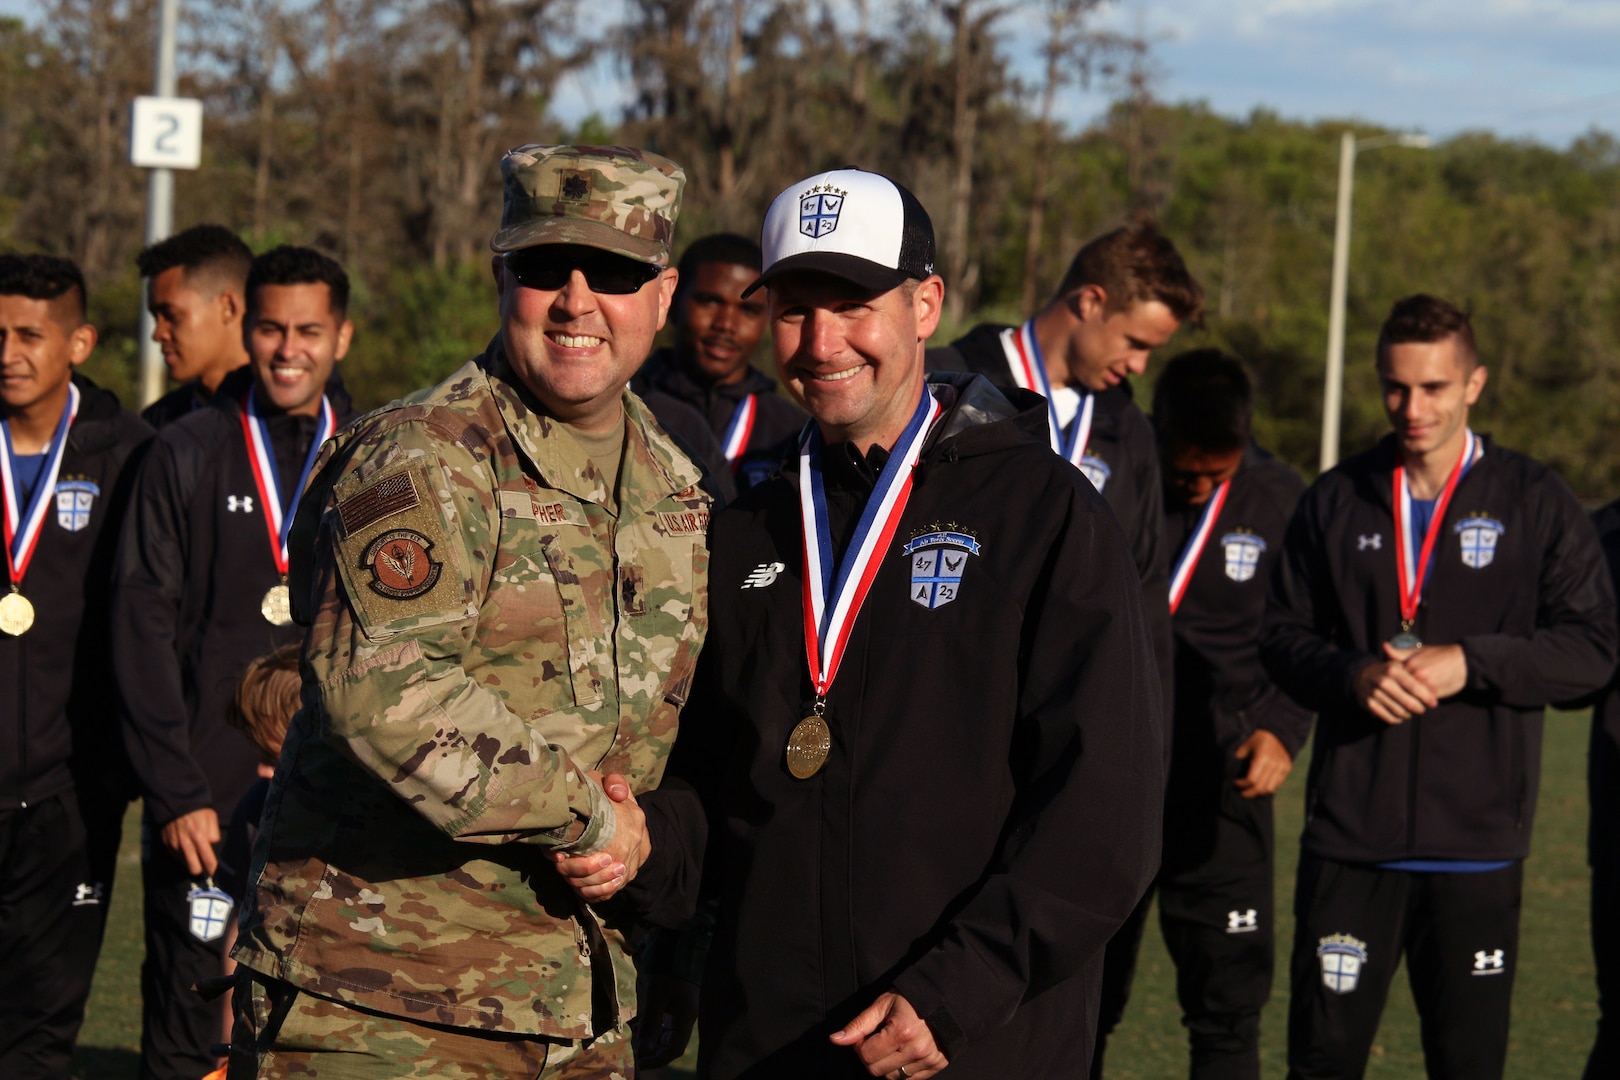 Air Force head coach Lt Col Jeremiah Kirschman of Fairchild Air Force Base, Wash. with MacDill Air Force Base Force Squadron Support, Lt. Col Mike Lupher celebrating team gold, as Air Force goes undefeated in the 2022 Armed Forces Men’s Soccer Championship hosted by MacDill Air Force Base in Tampa, Florida from March 6-12.  The best players from the Army, Marine Corps, Navy and Air Force (with Space Force players) compete for gold.  (Photo by Ms. Arianna Dinote, Department of Defense Photo - Released)